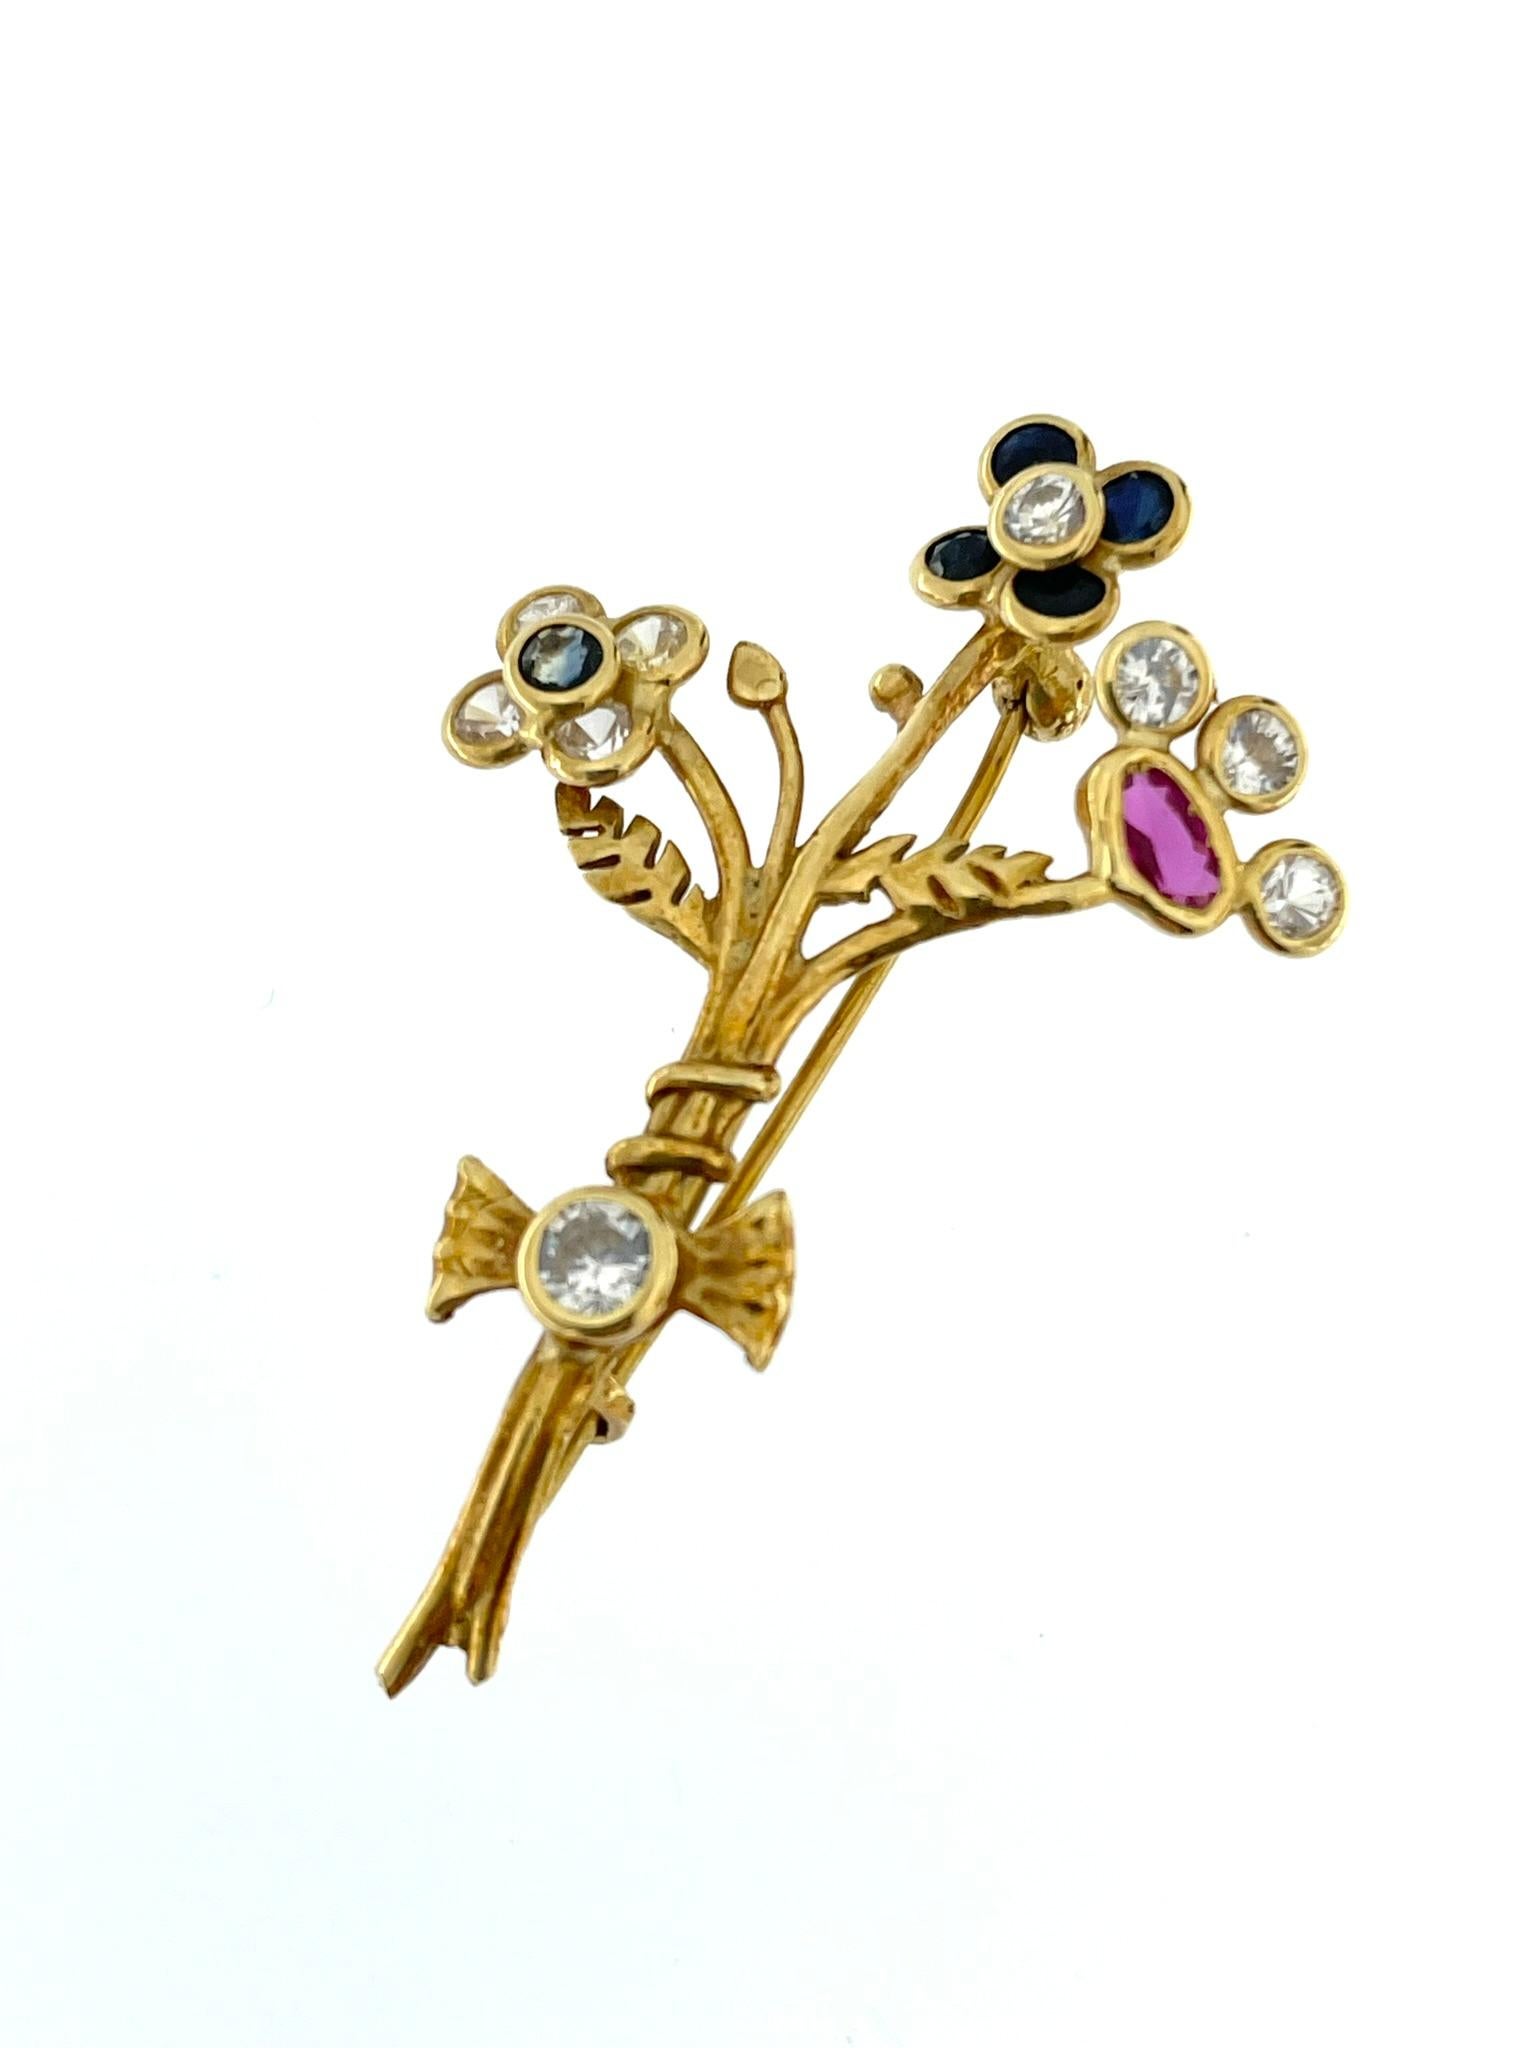 Handcrafted 18 karat Yellow Gold Brooch with Zircons and Quartz For Sale 1